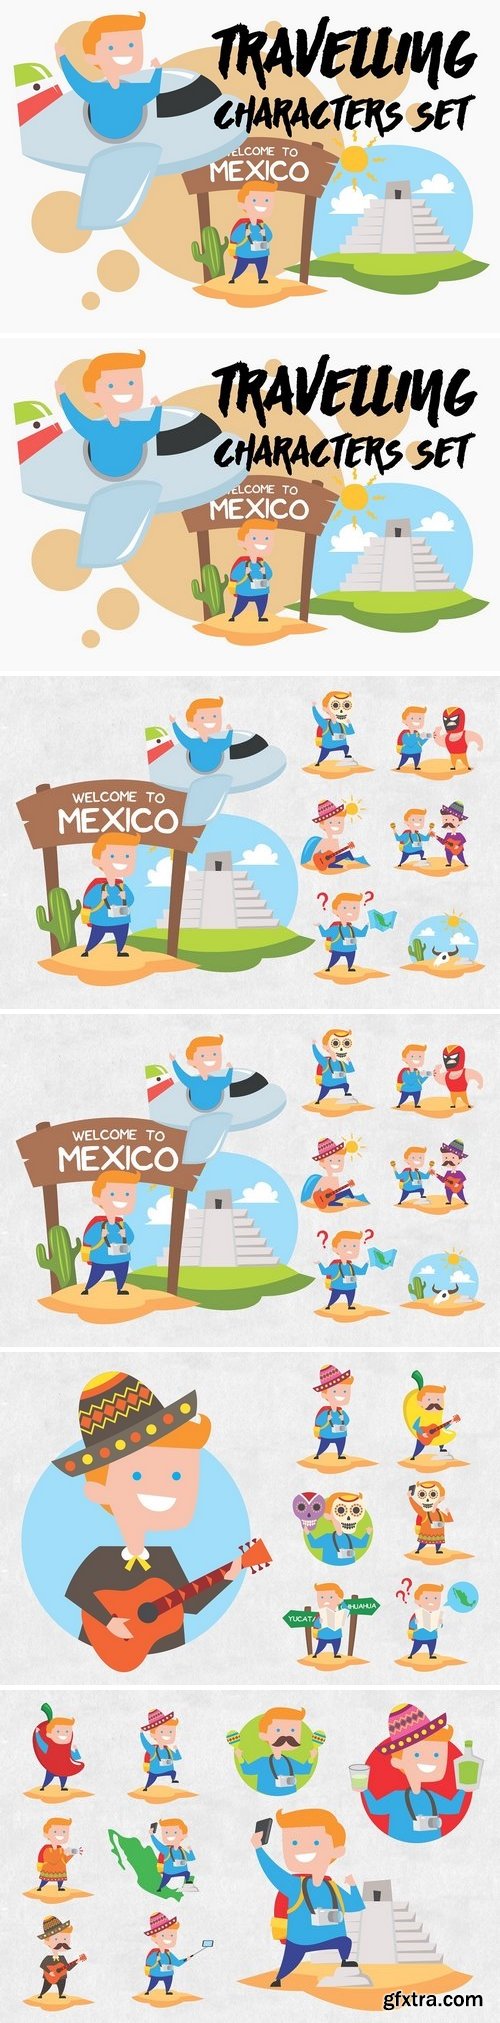 CM - Travelling Characters Set - Mexico 1570229